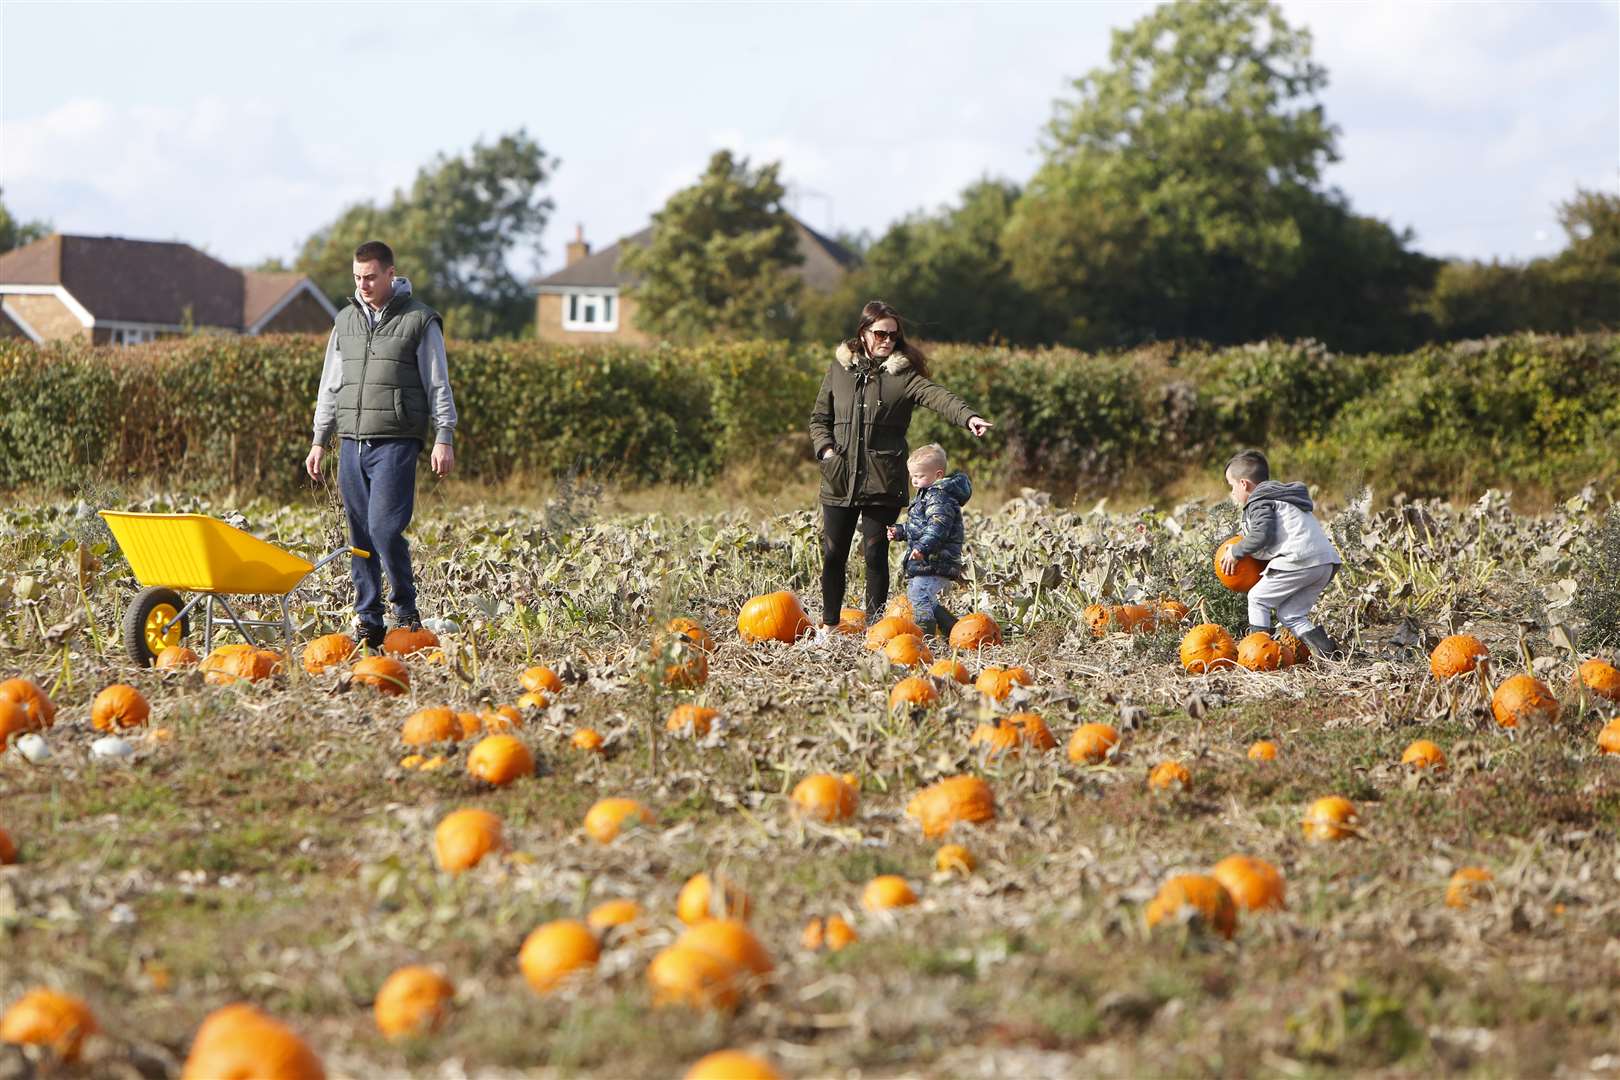 It's picking time at Pumpkin Moon, near Maidstone